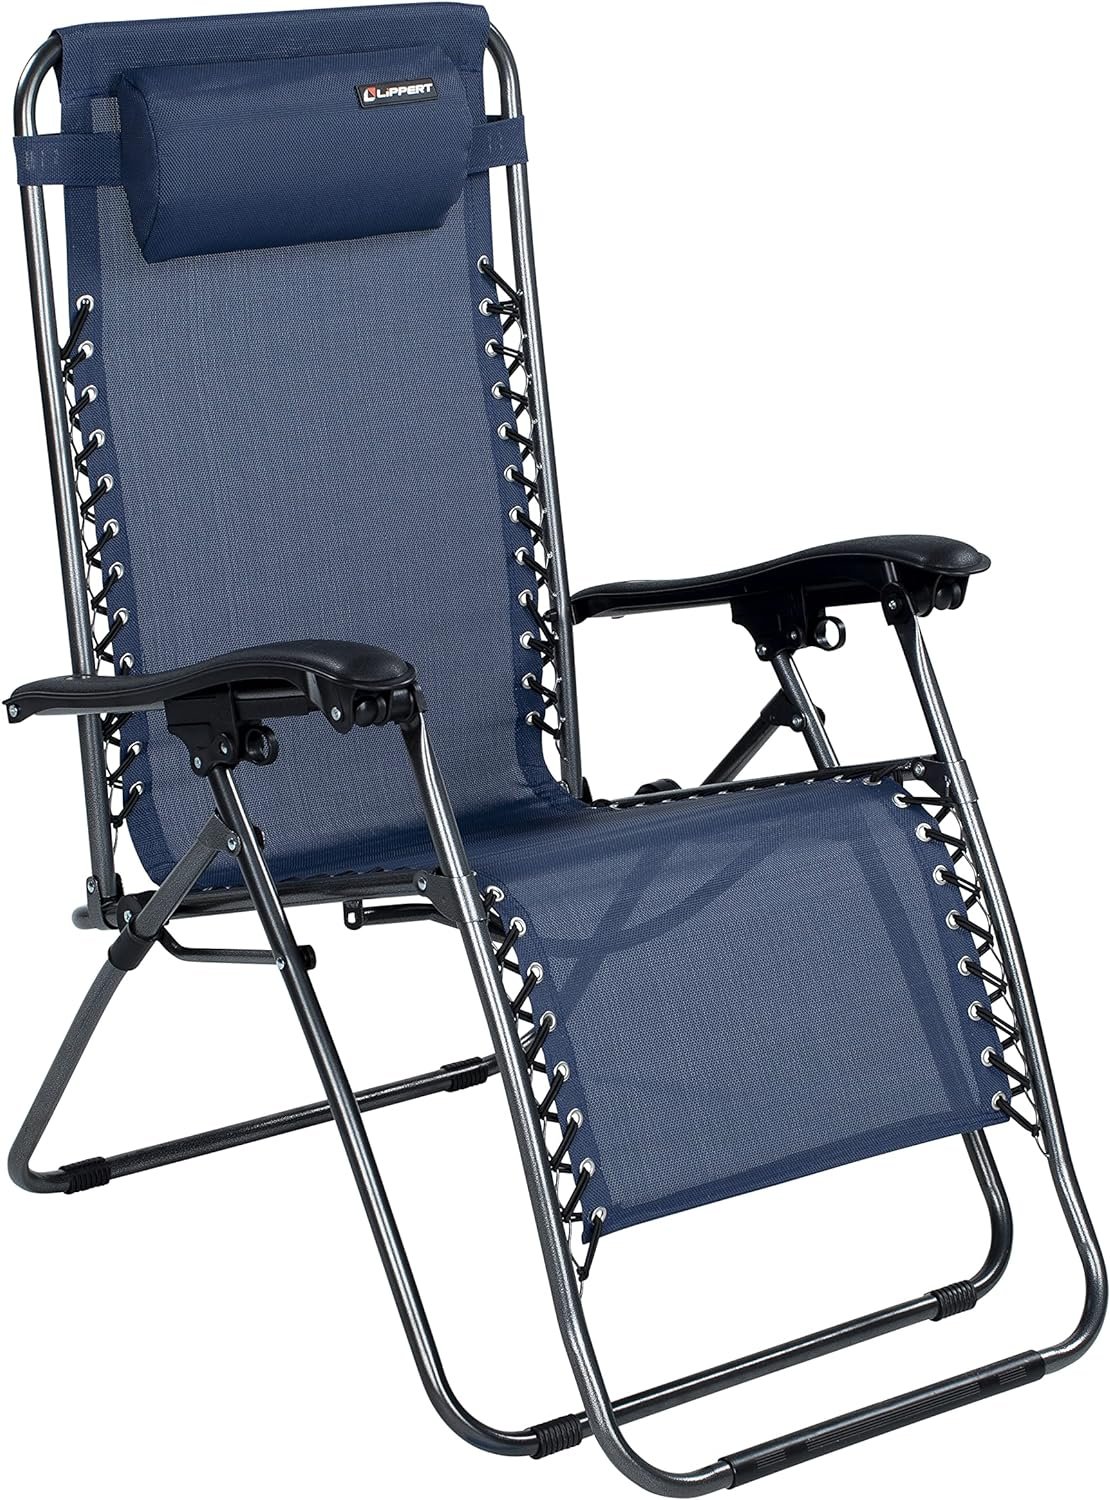 Black Breathable Mesh Reclining Chair Review